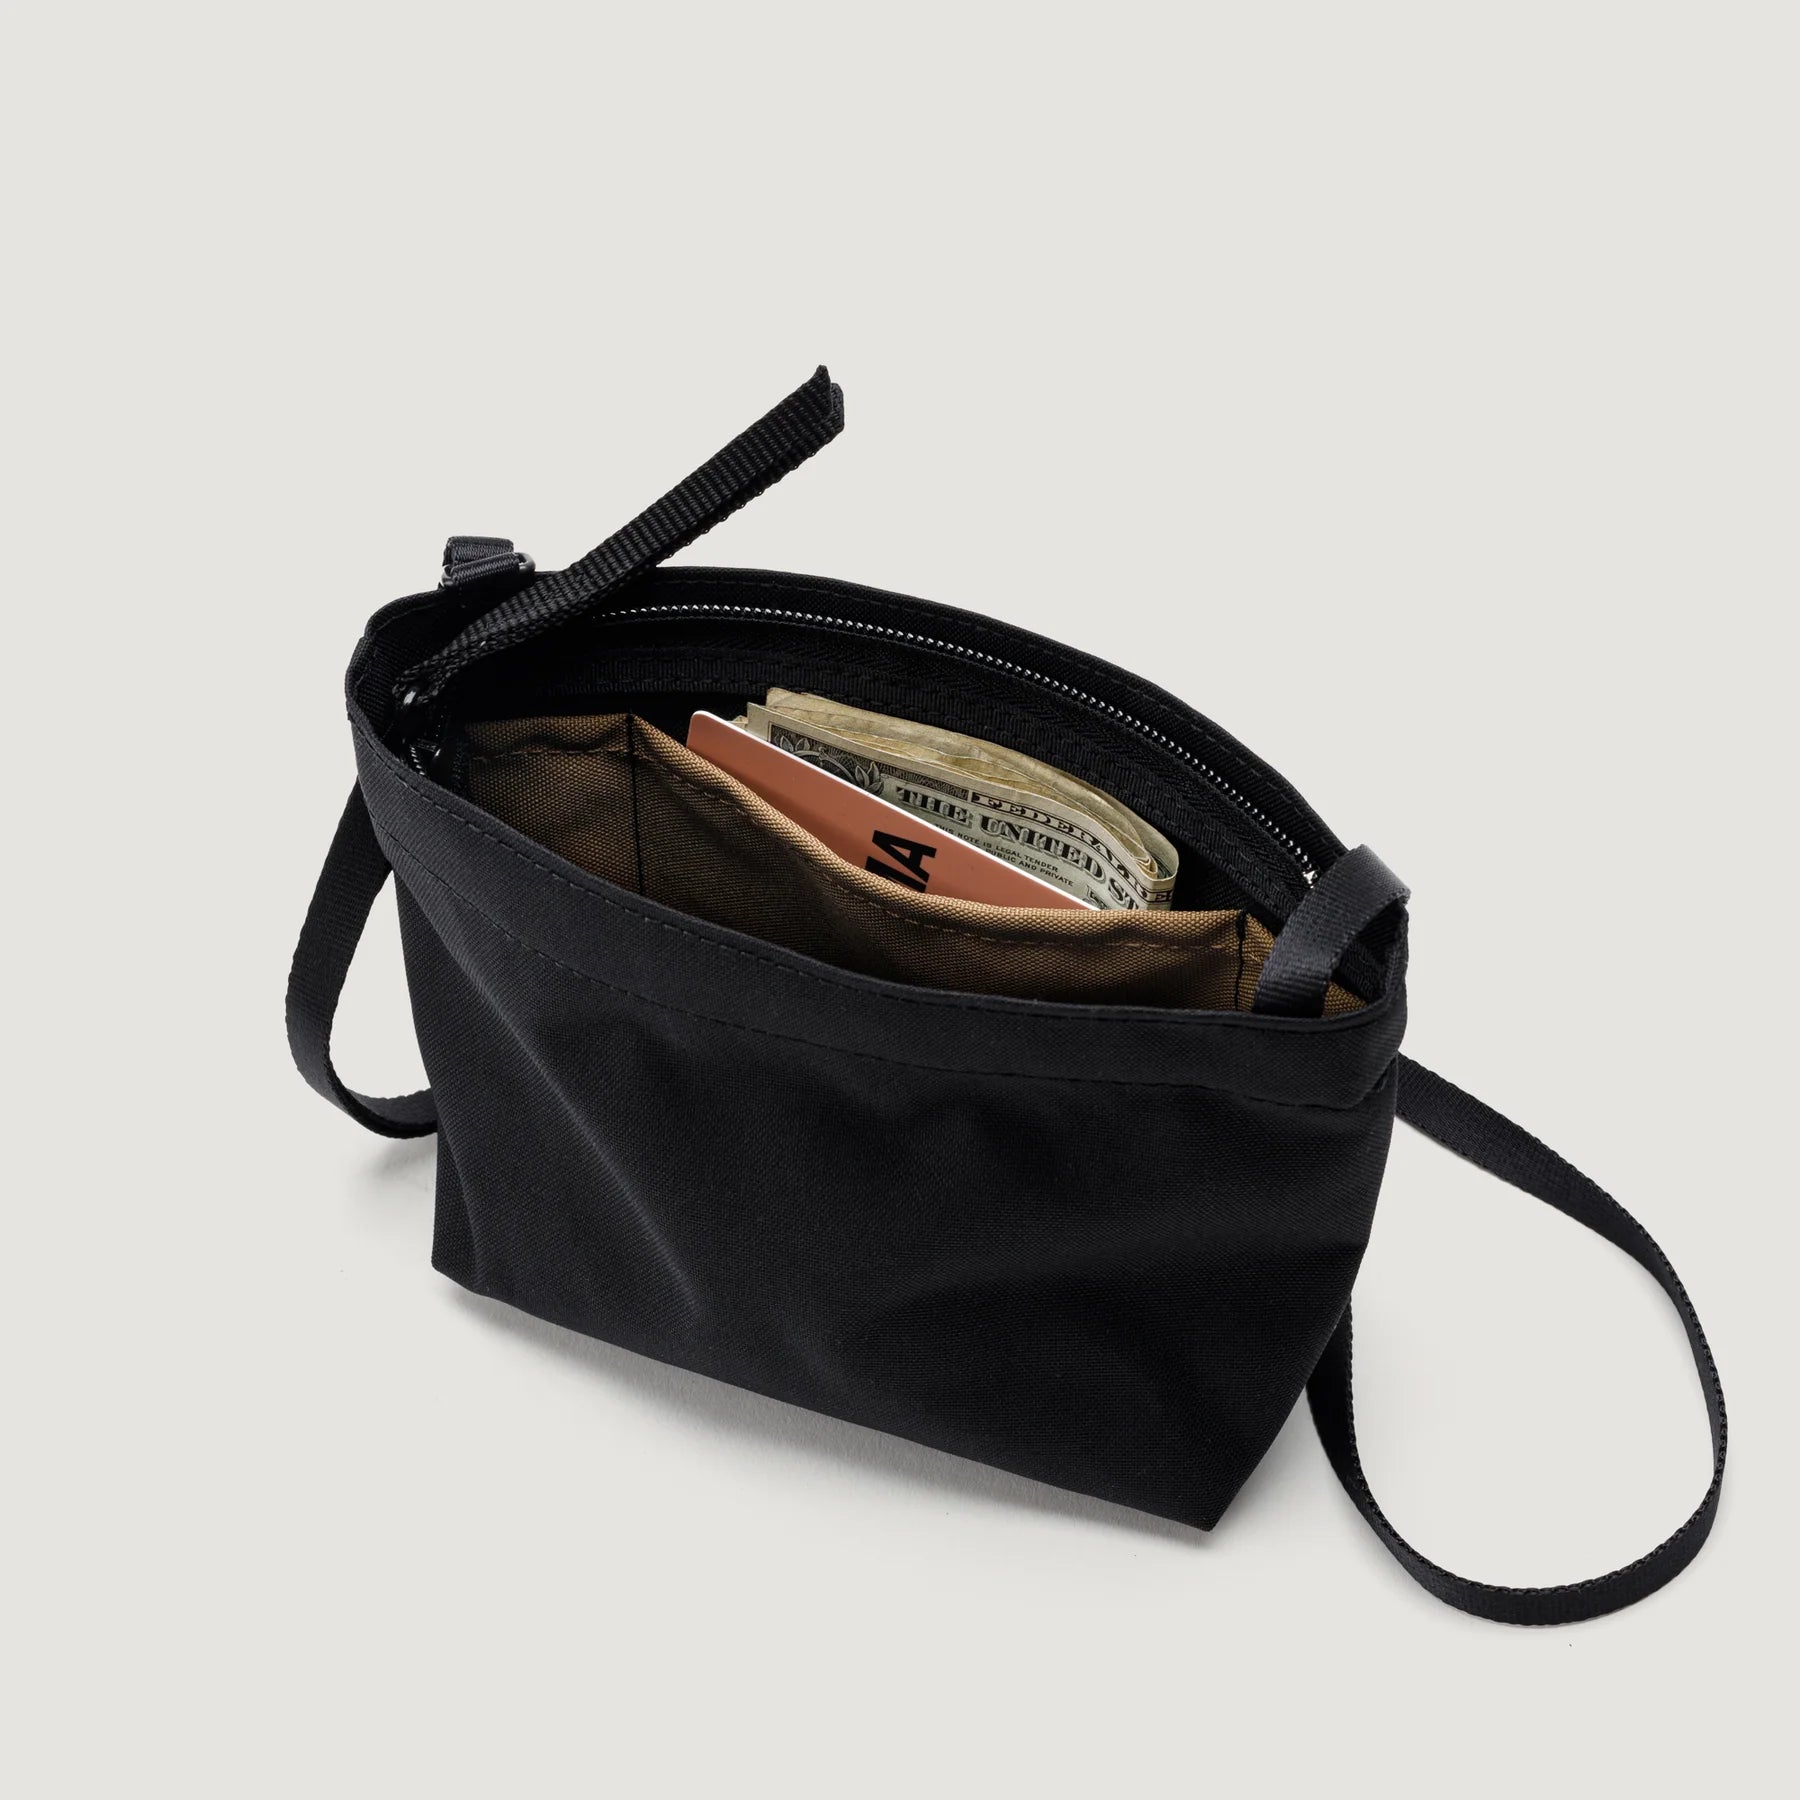 A small black Bags in Progress Zipper Pouch Mini partially open, revealing money and cards inside, against a plain white background.